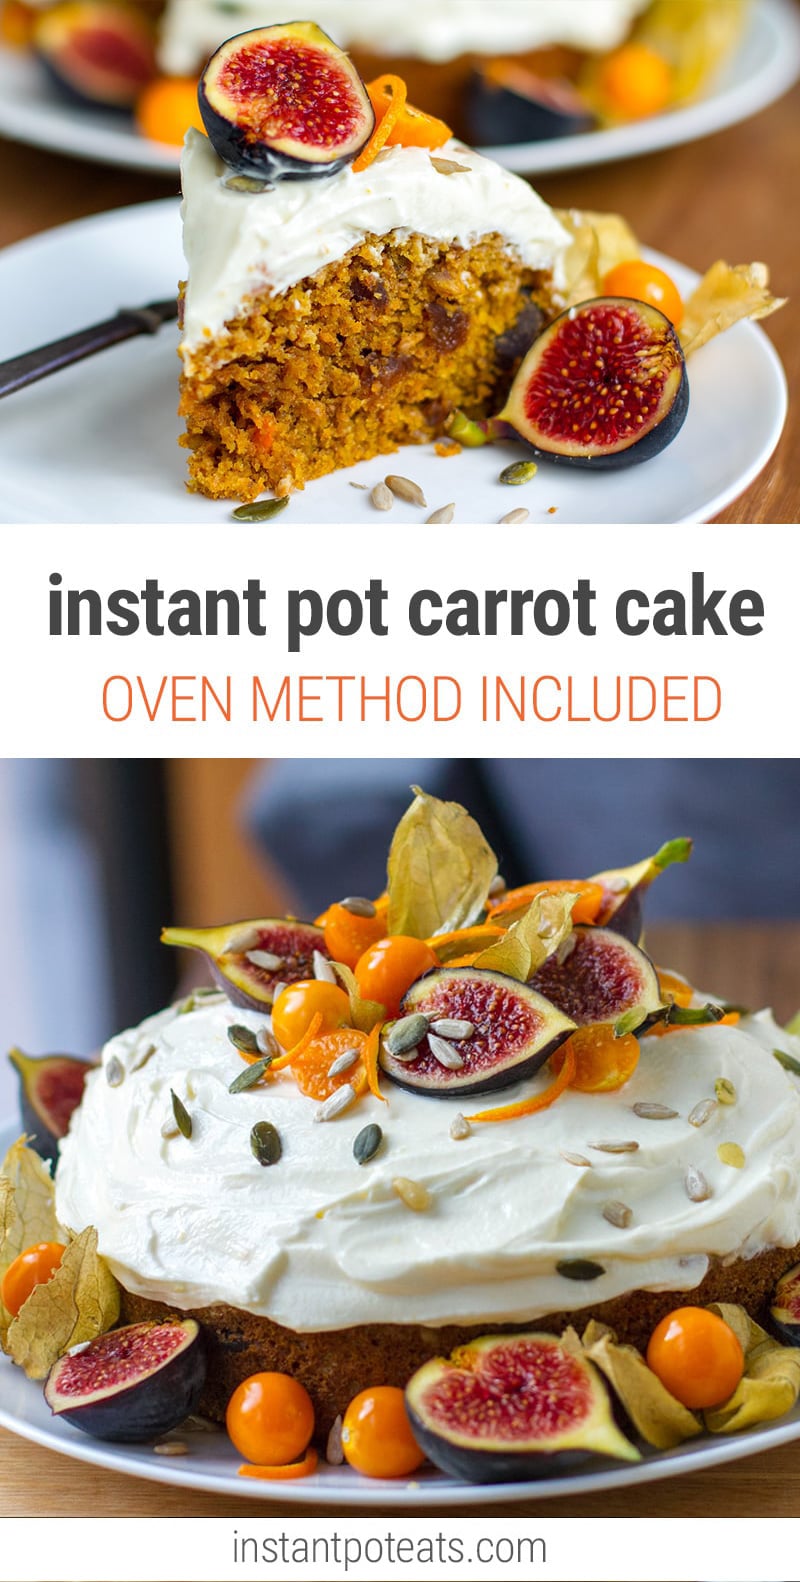 Instant Pot Carrot Cake (With Step-By-Step Pictures)